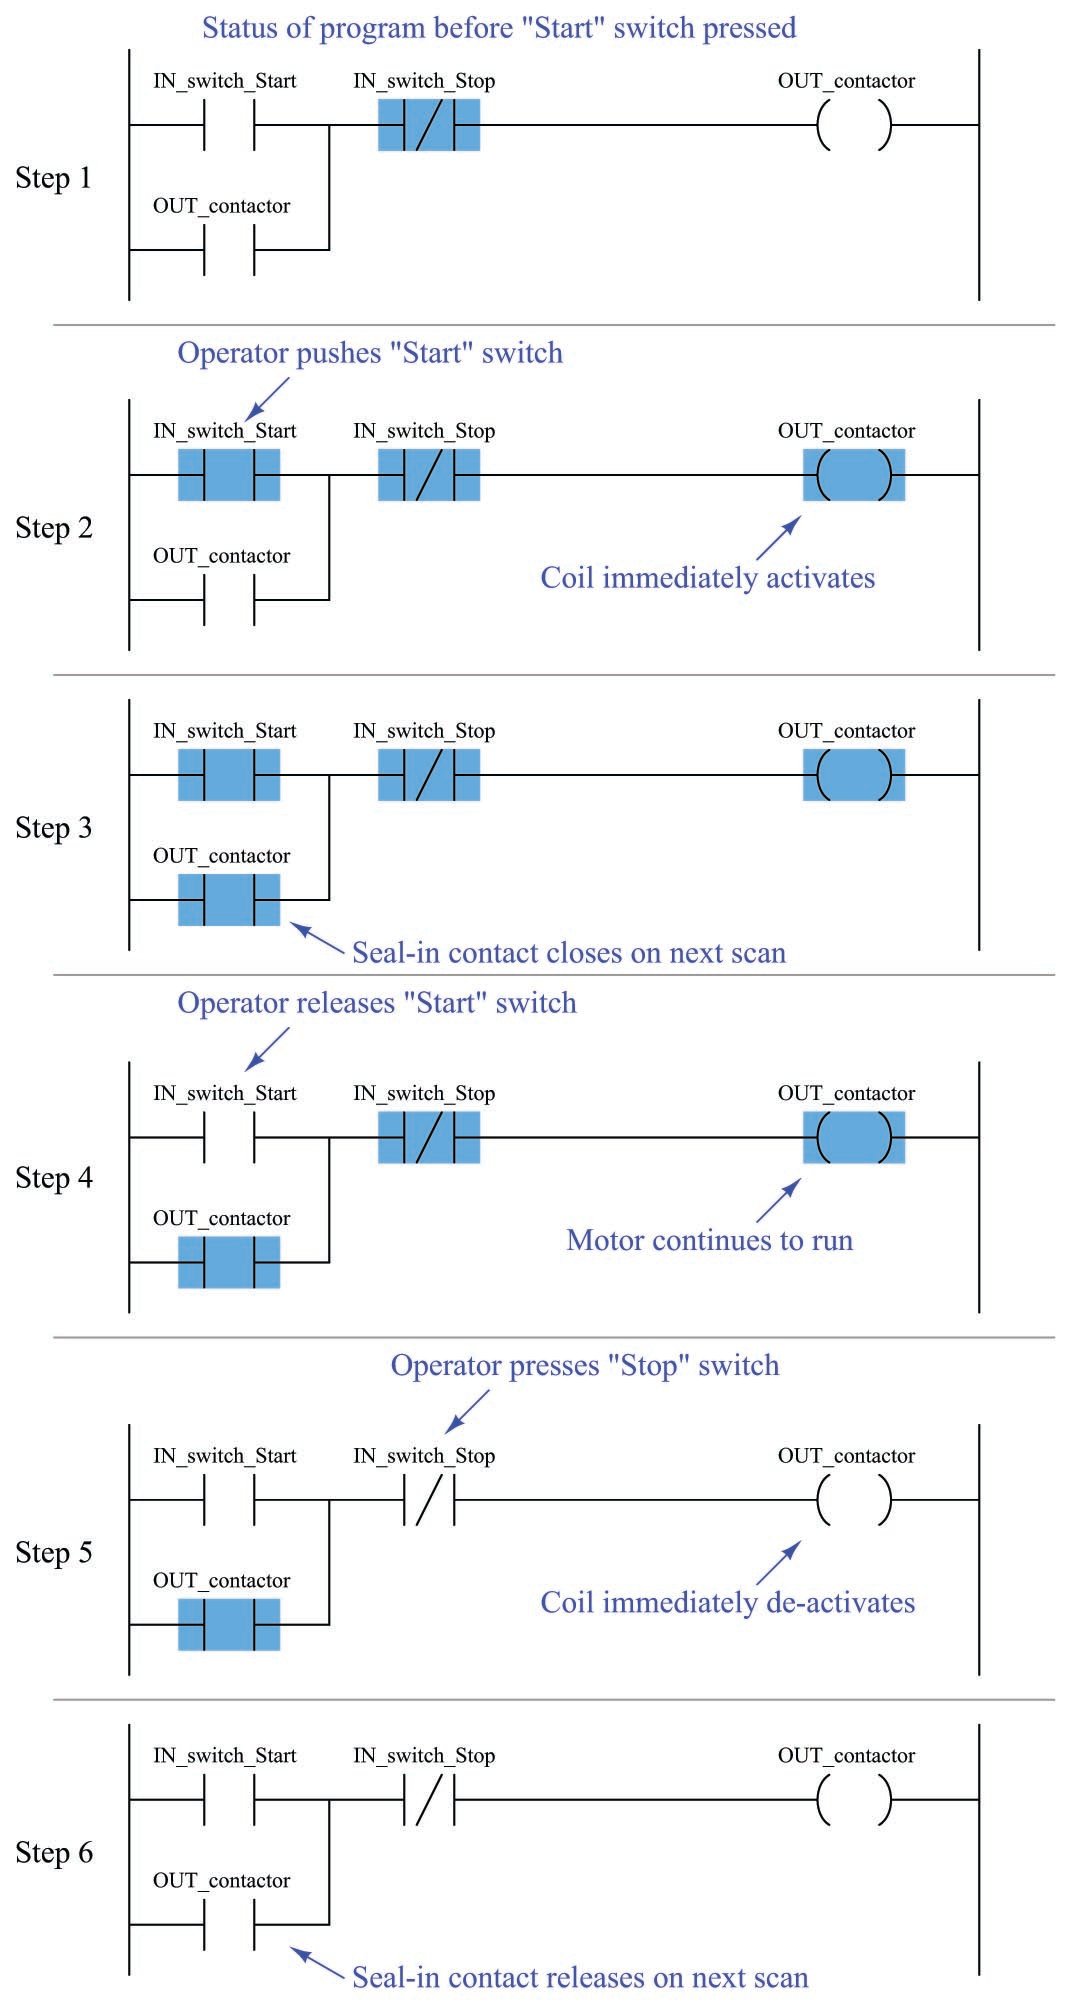 a plc ladder logic program consists of a number of rungs with each rung controlling an input